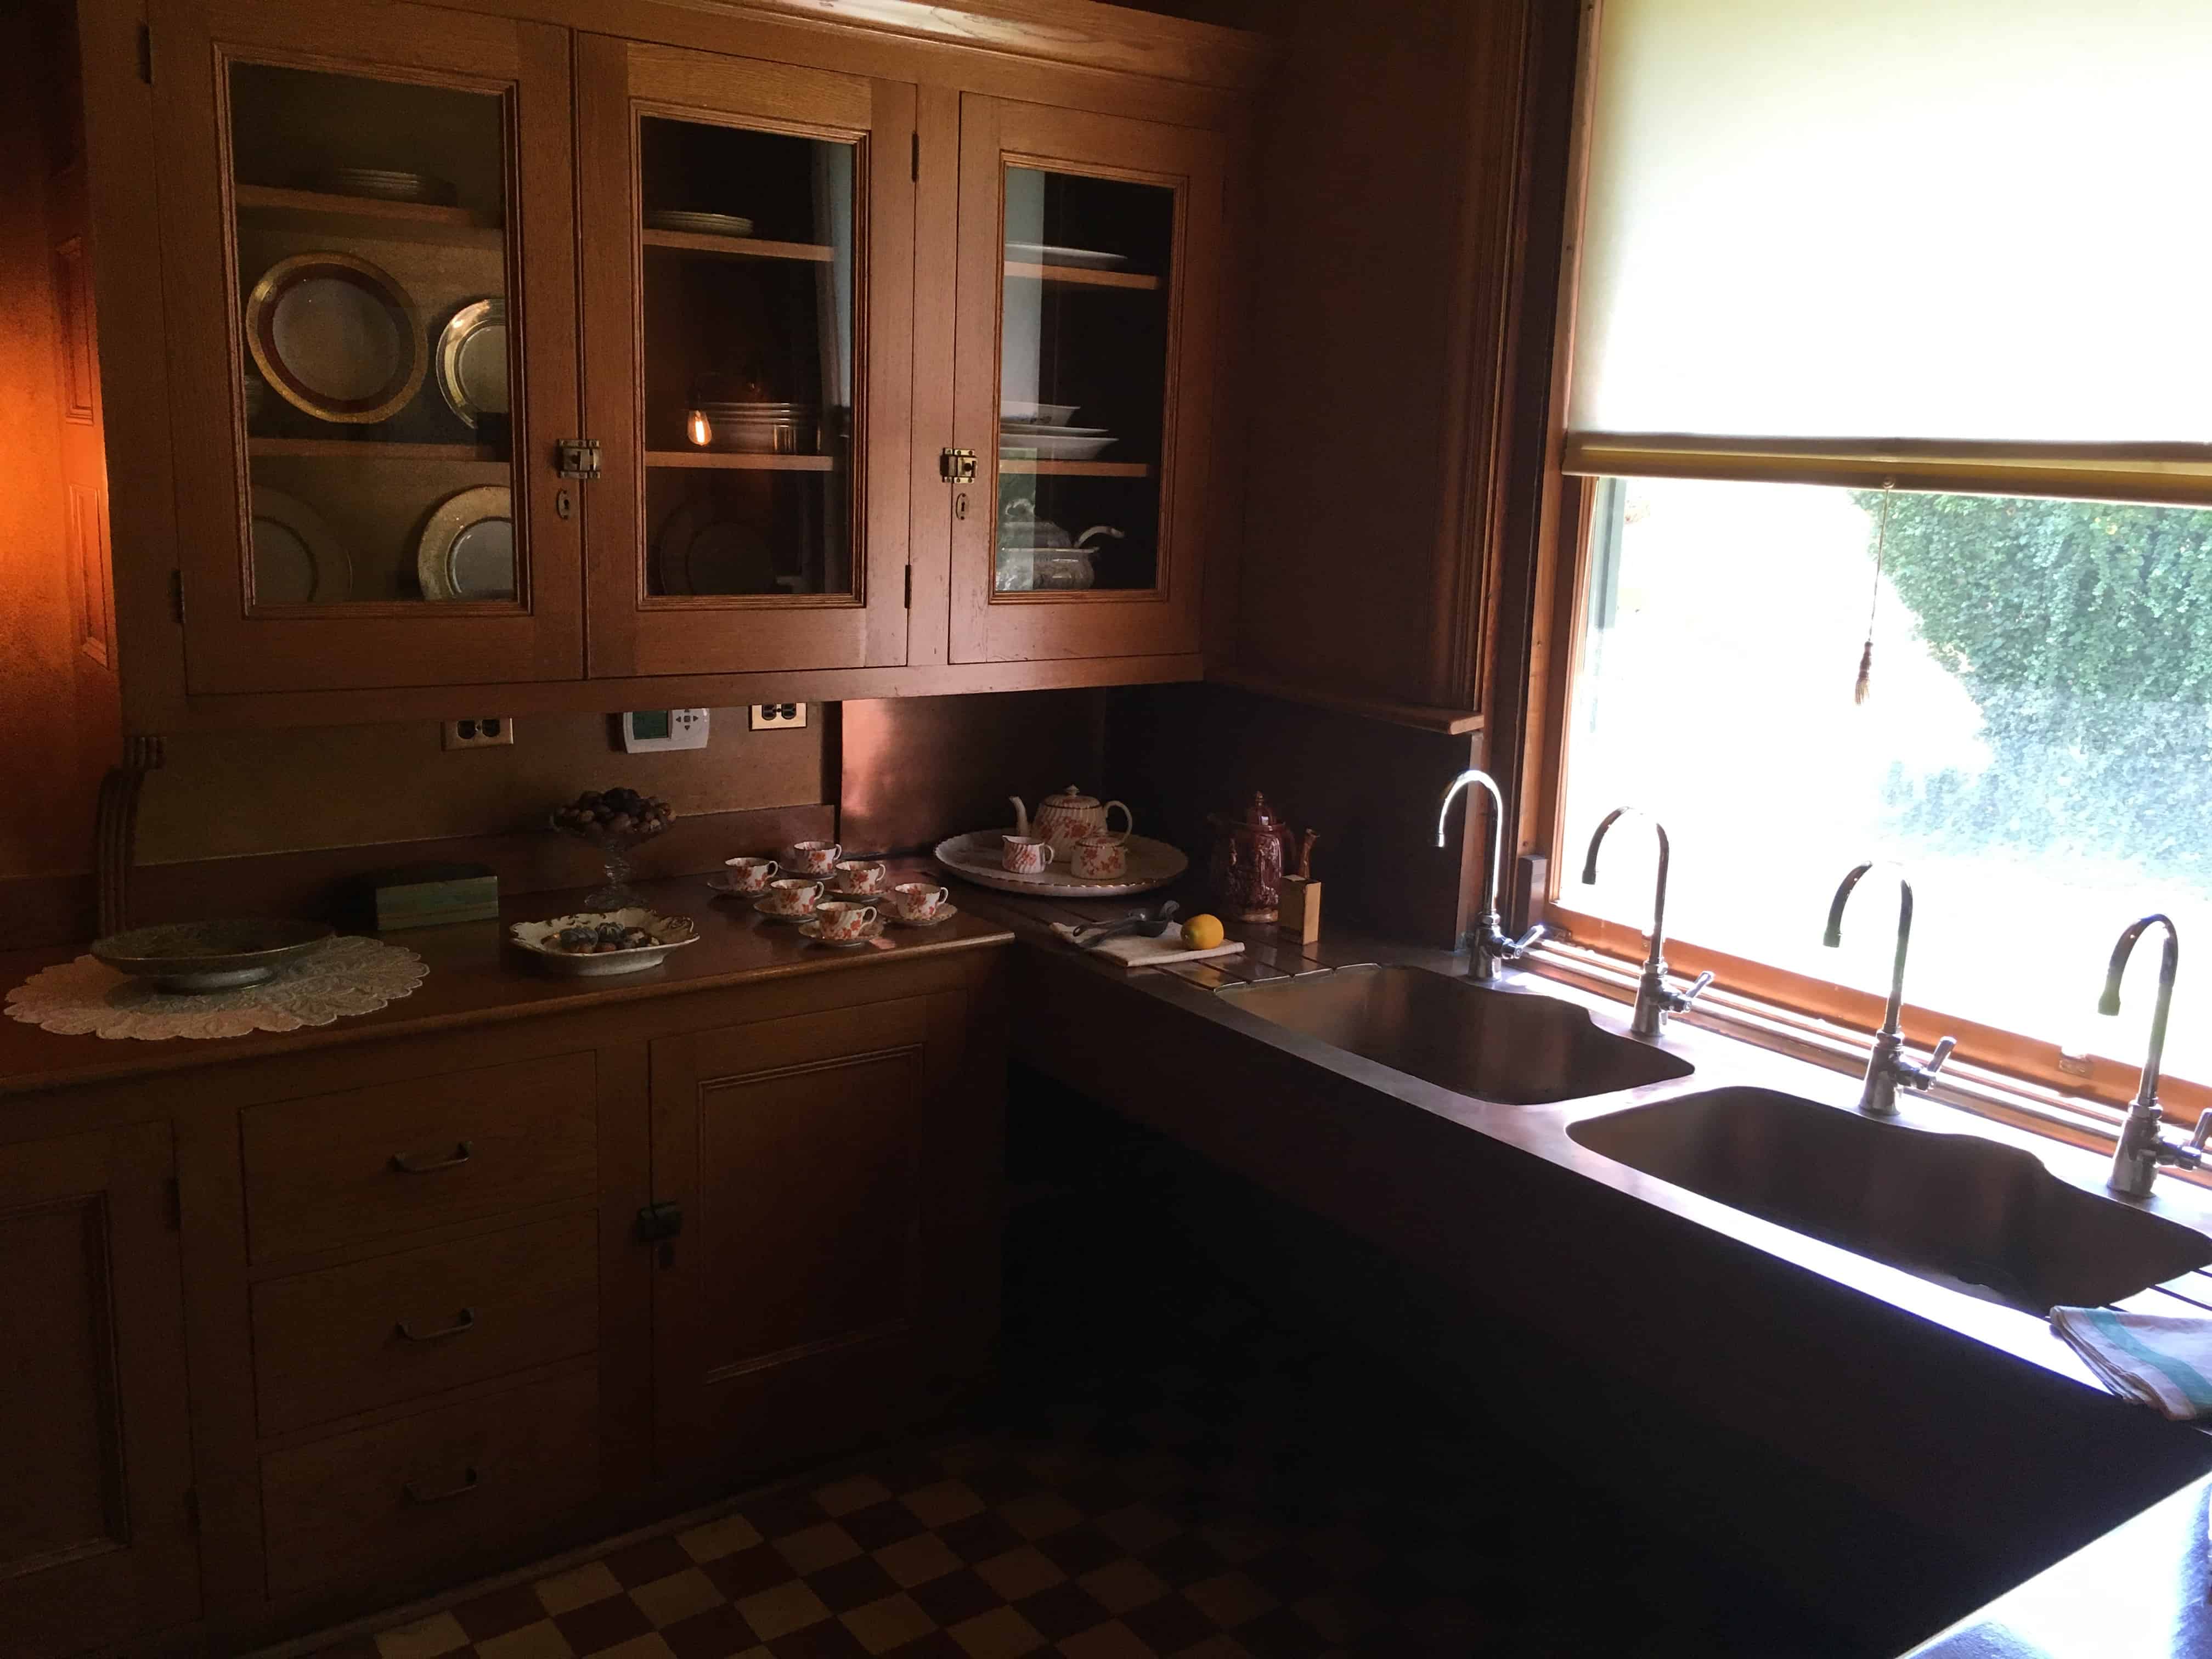 Kitchen at the John J. Glessner House in Chicago, Illinois